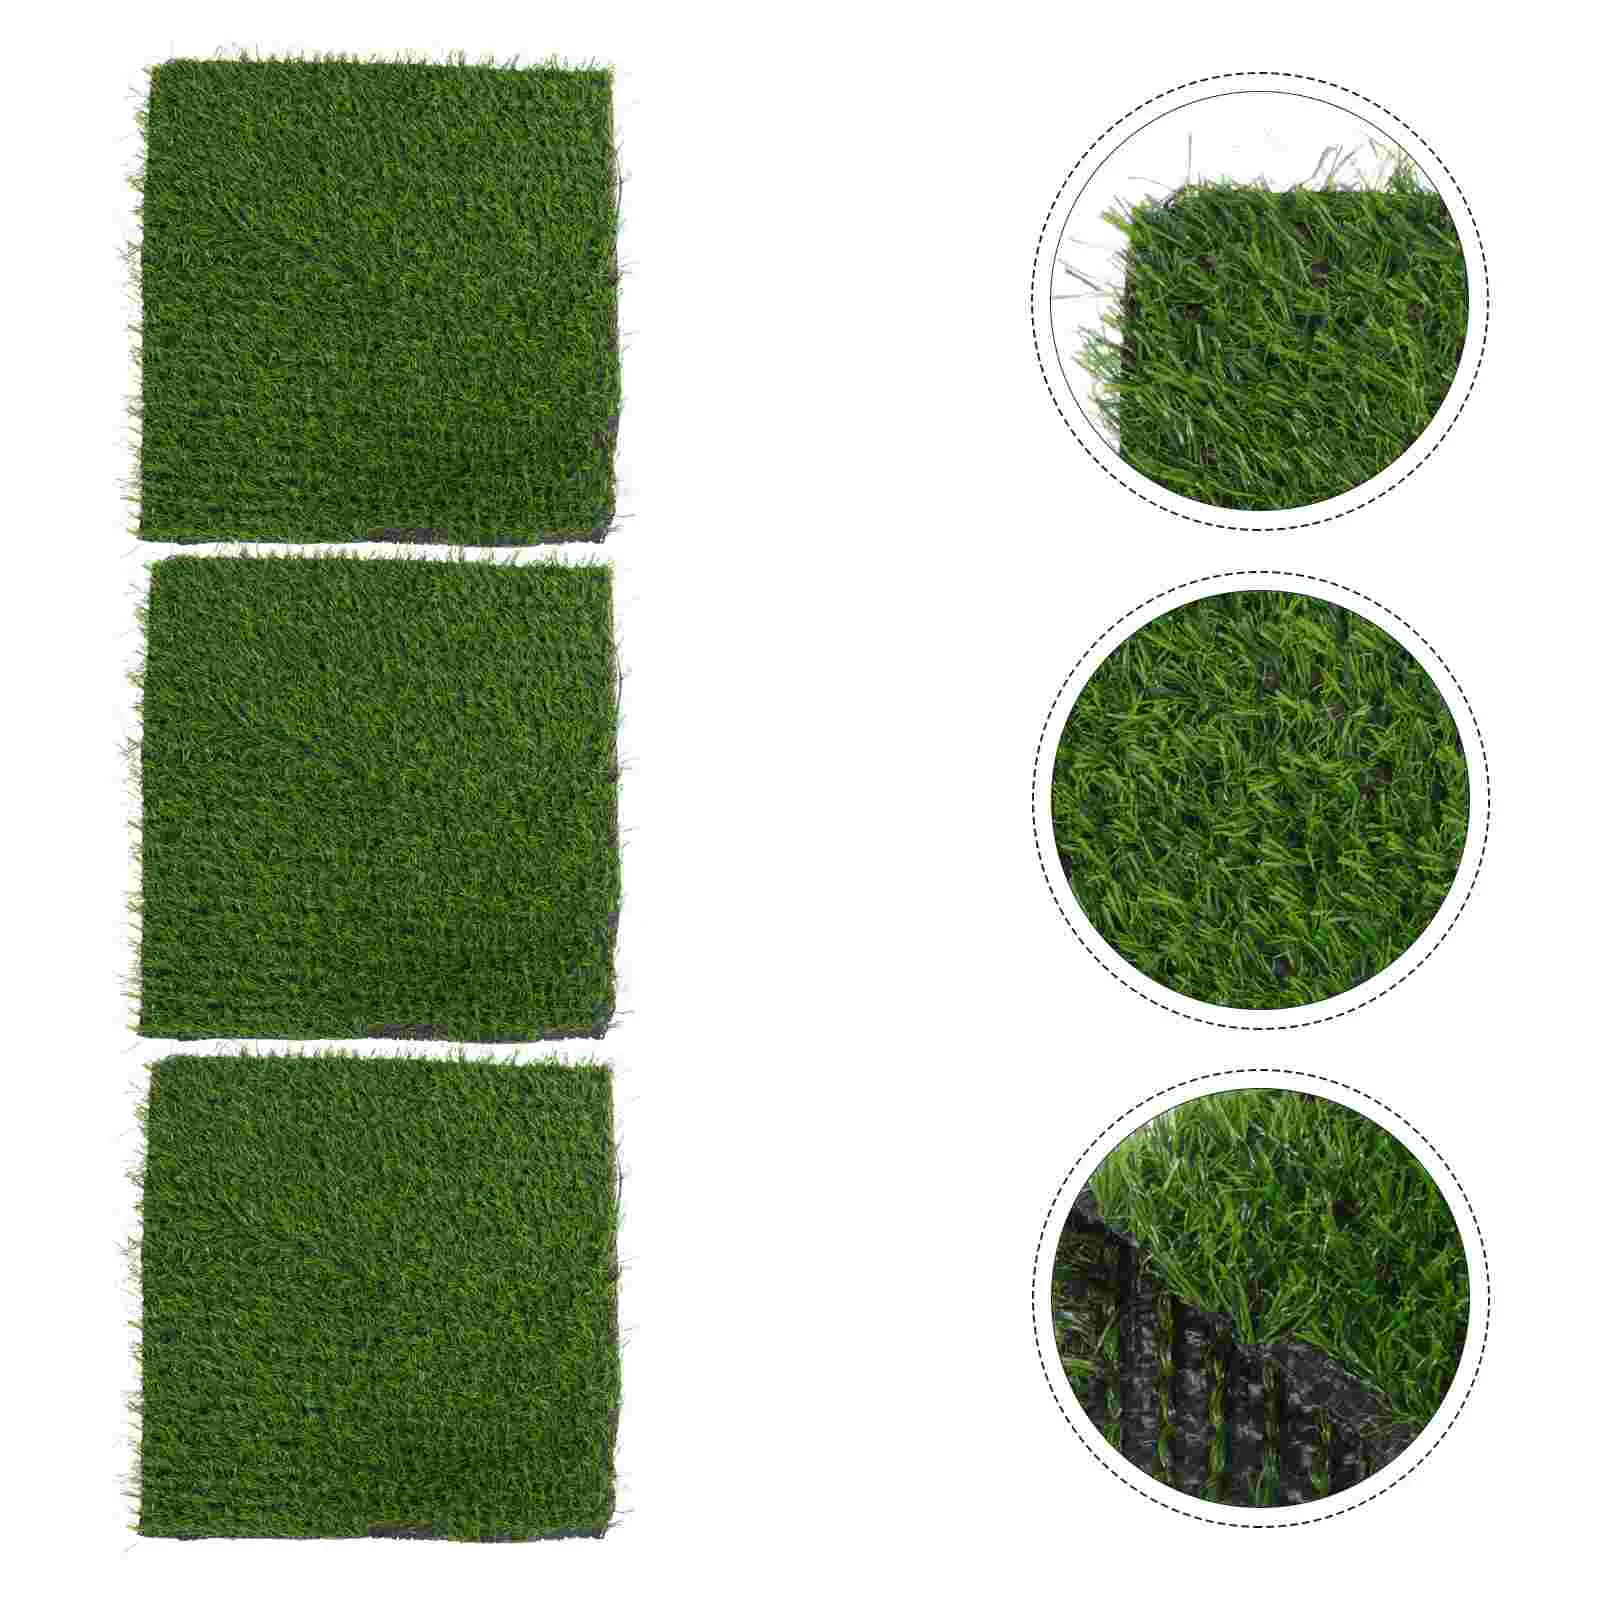 

Chicken Nesting Pads Box Mats Grass Coop Bedding Turf Nest Fake Artificial Mat Cushions Washable Laying Poultry Boxes Liners Egg